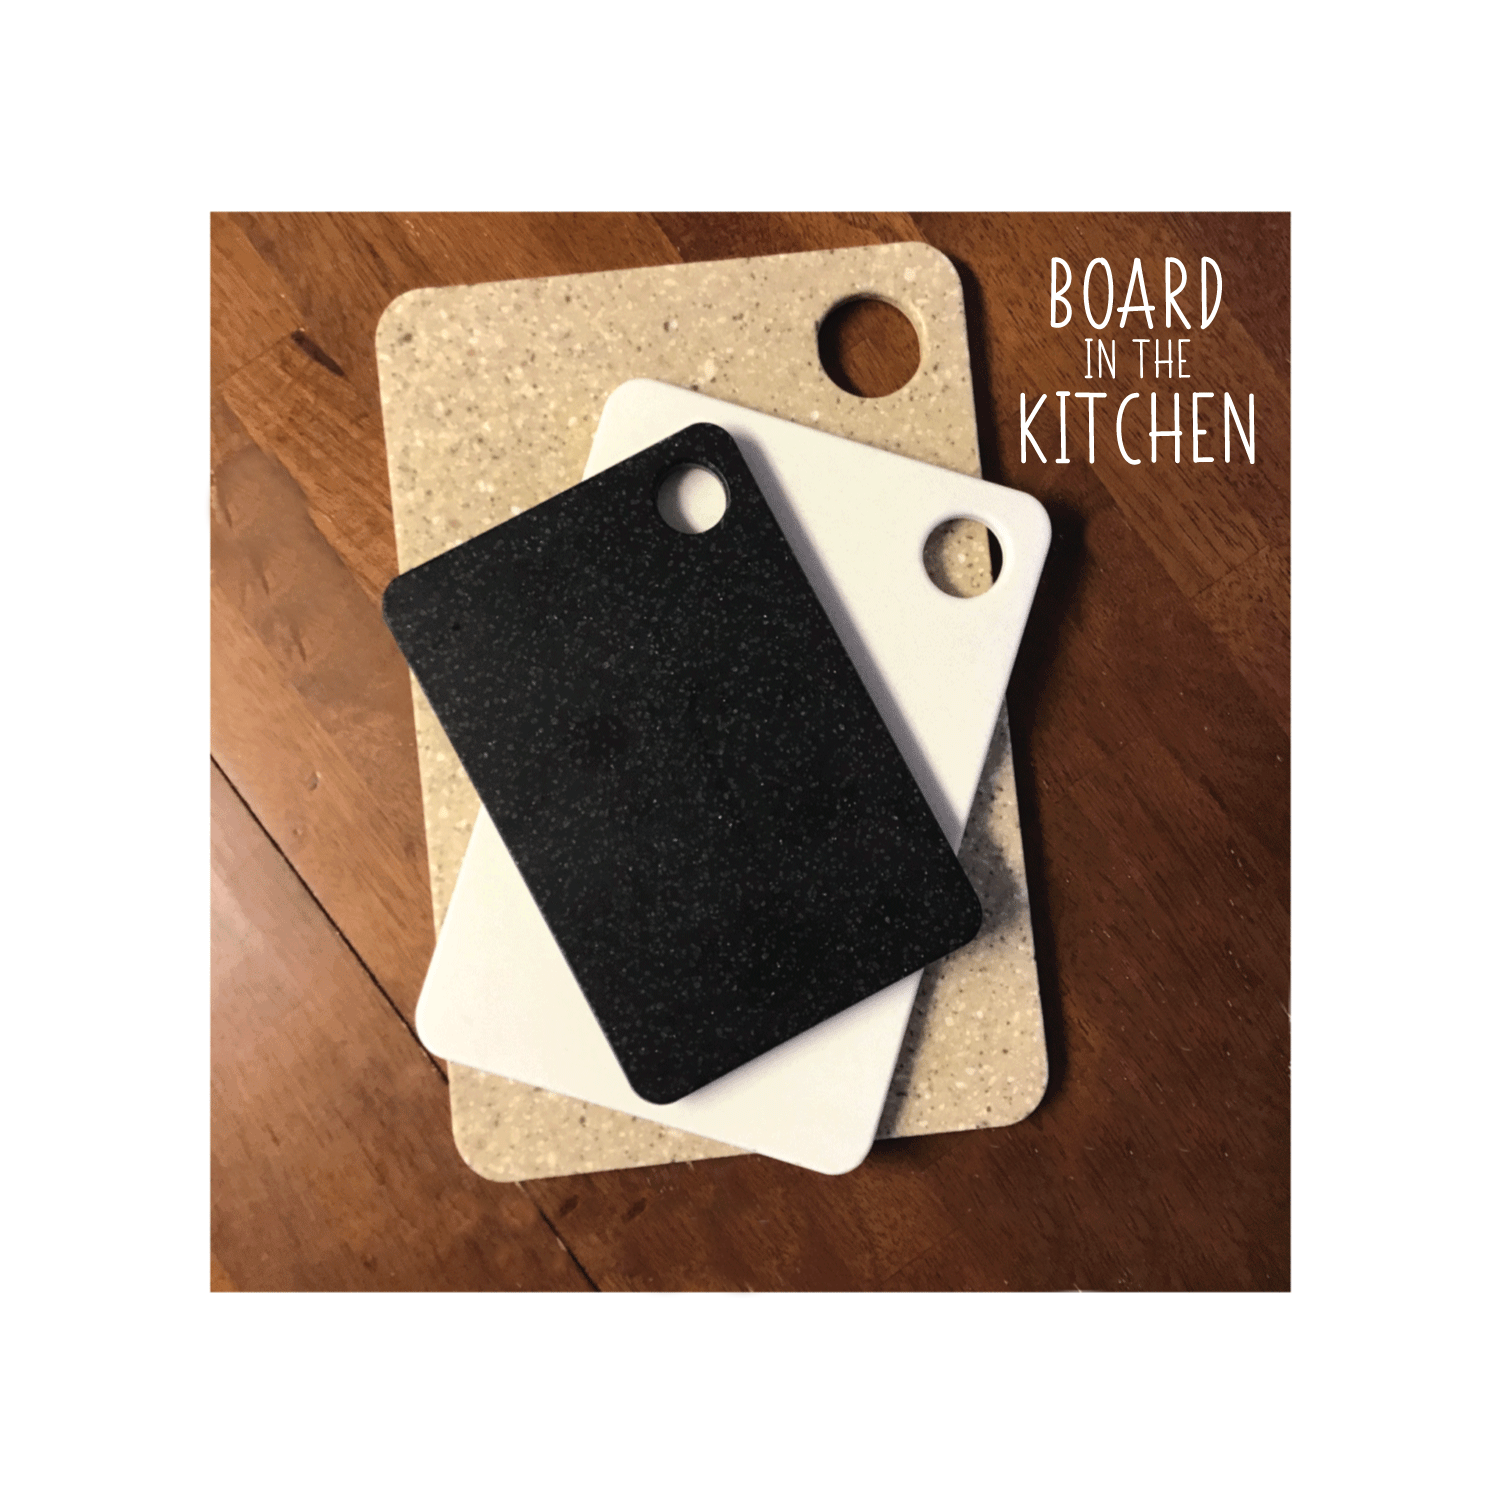 https://boardinthekitchen.com/wp-content/uploads/2020/07/cutting-board-5-2-cleaned-up.png